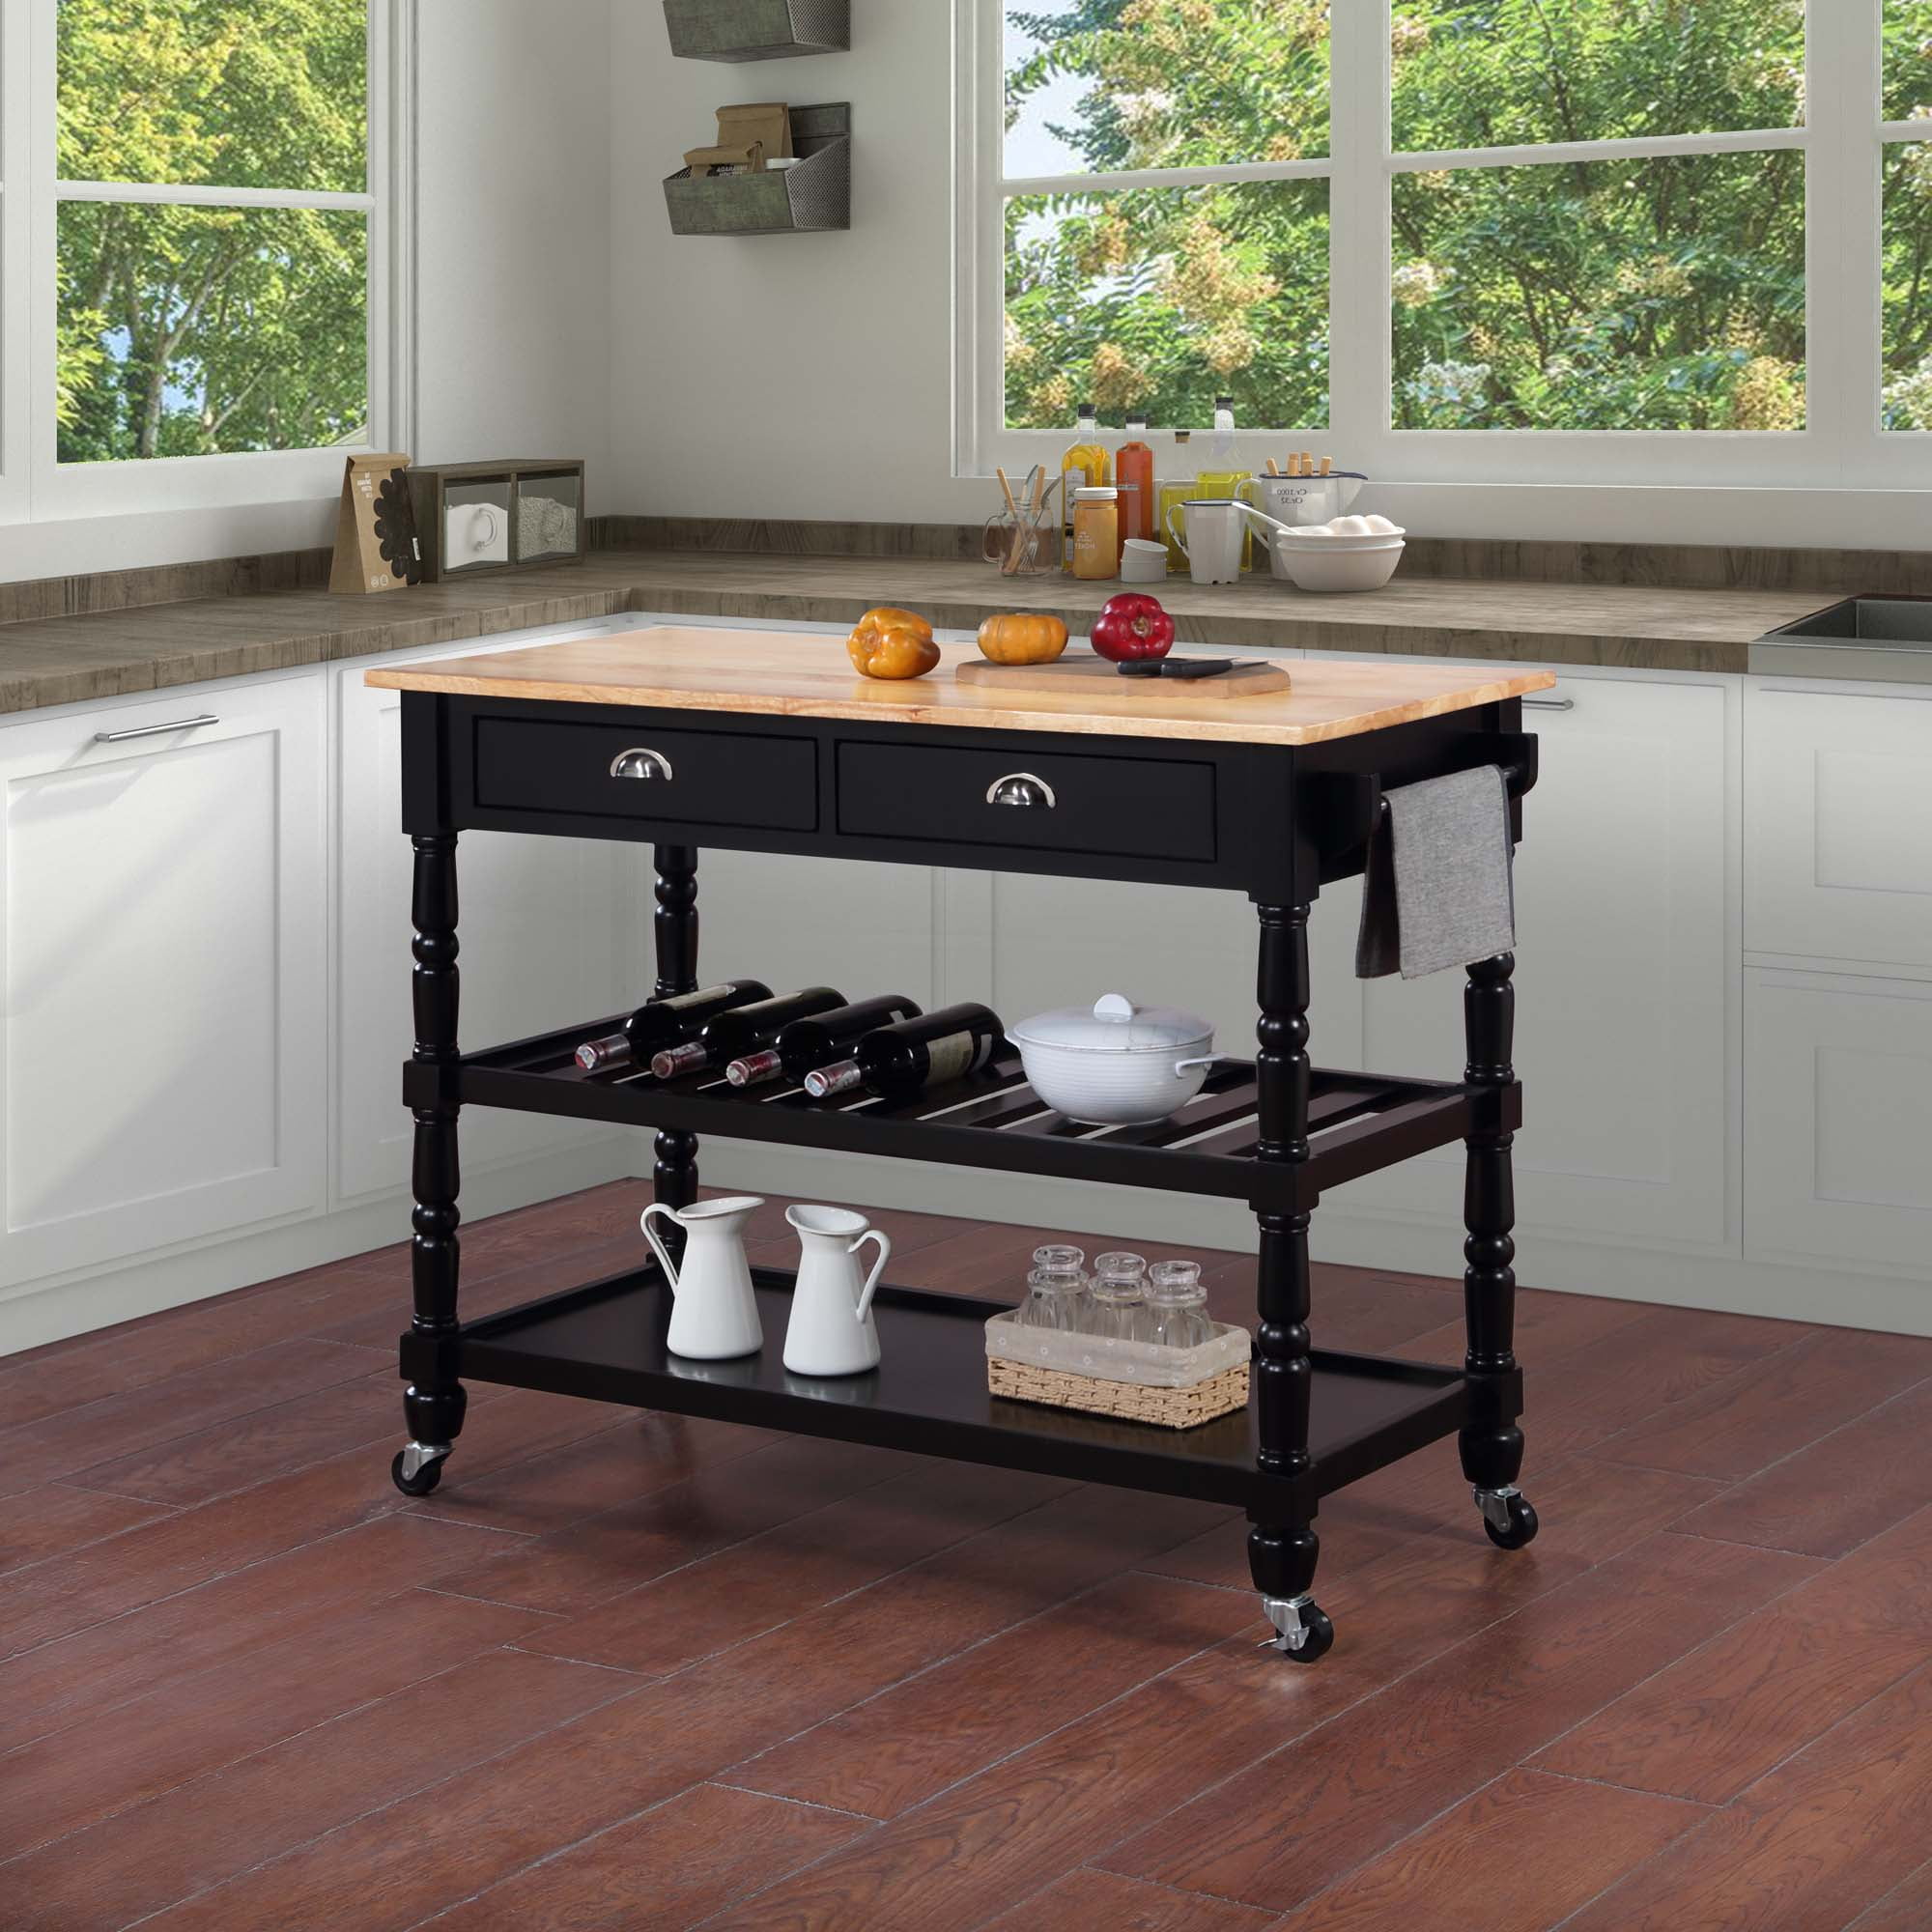 Picture of Convenience Concepts 802236BBBL French Country 3 Tier Butcher Block Kitchen Cart with Drawers - Butcher Block/Black